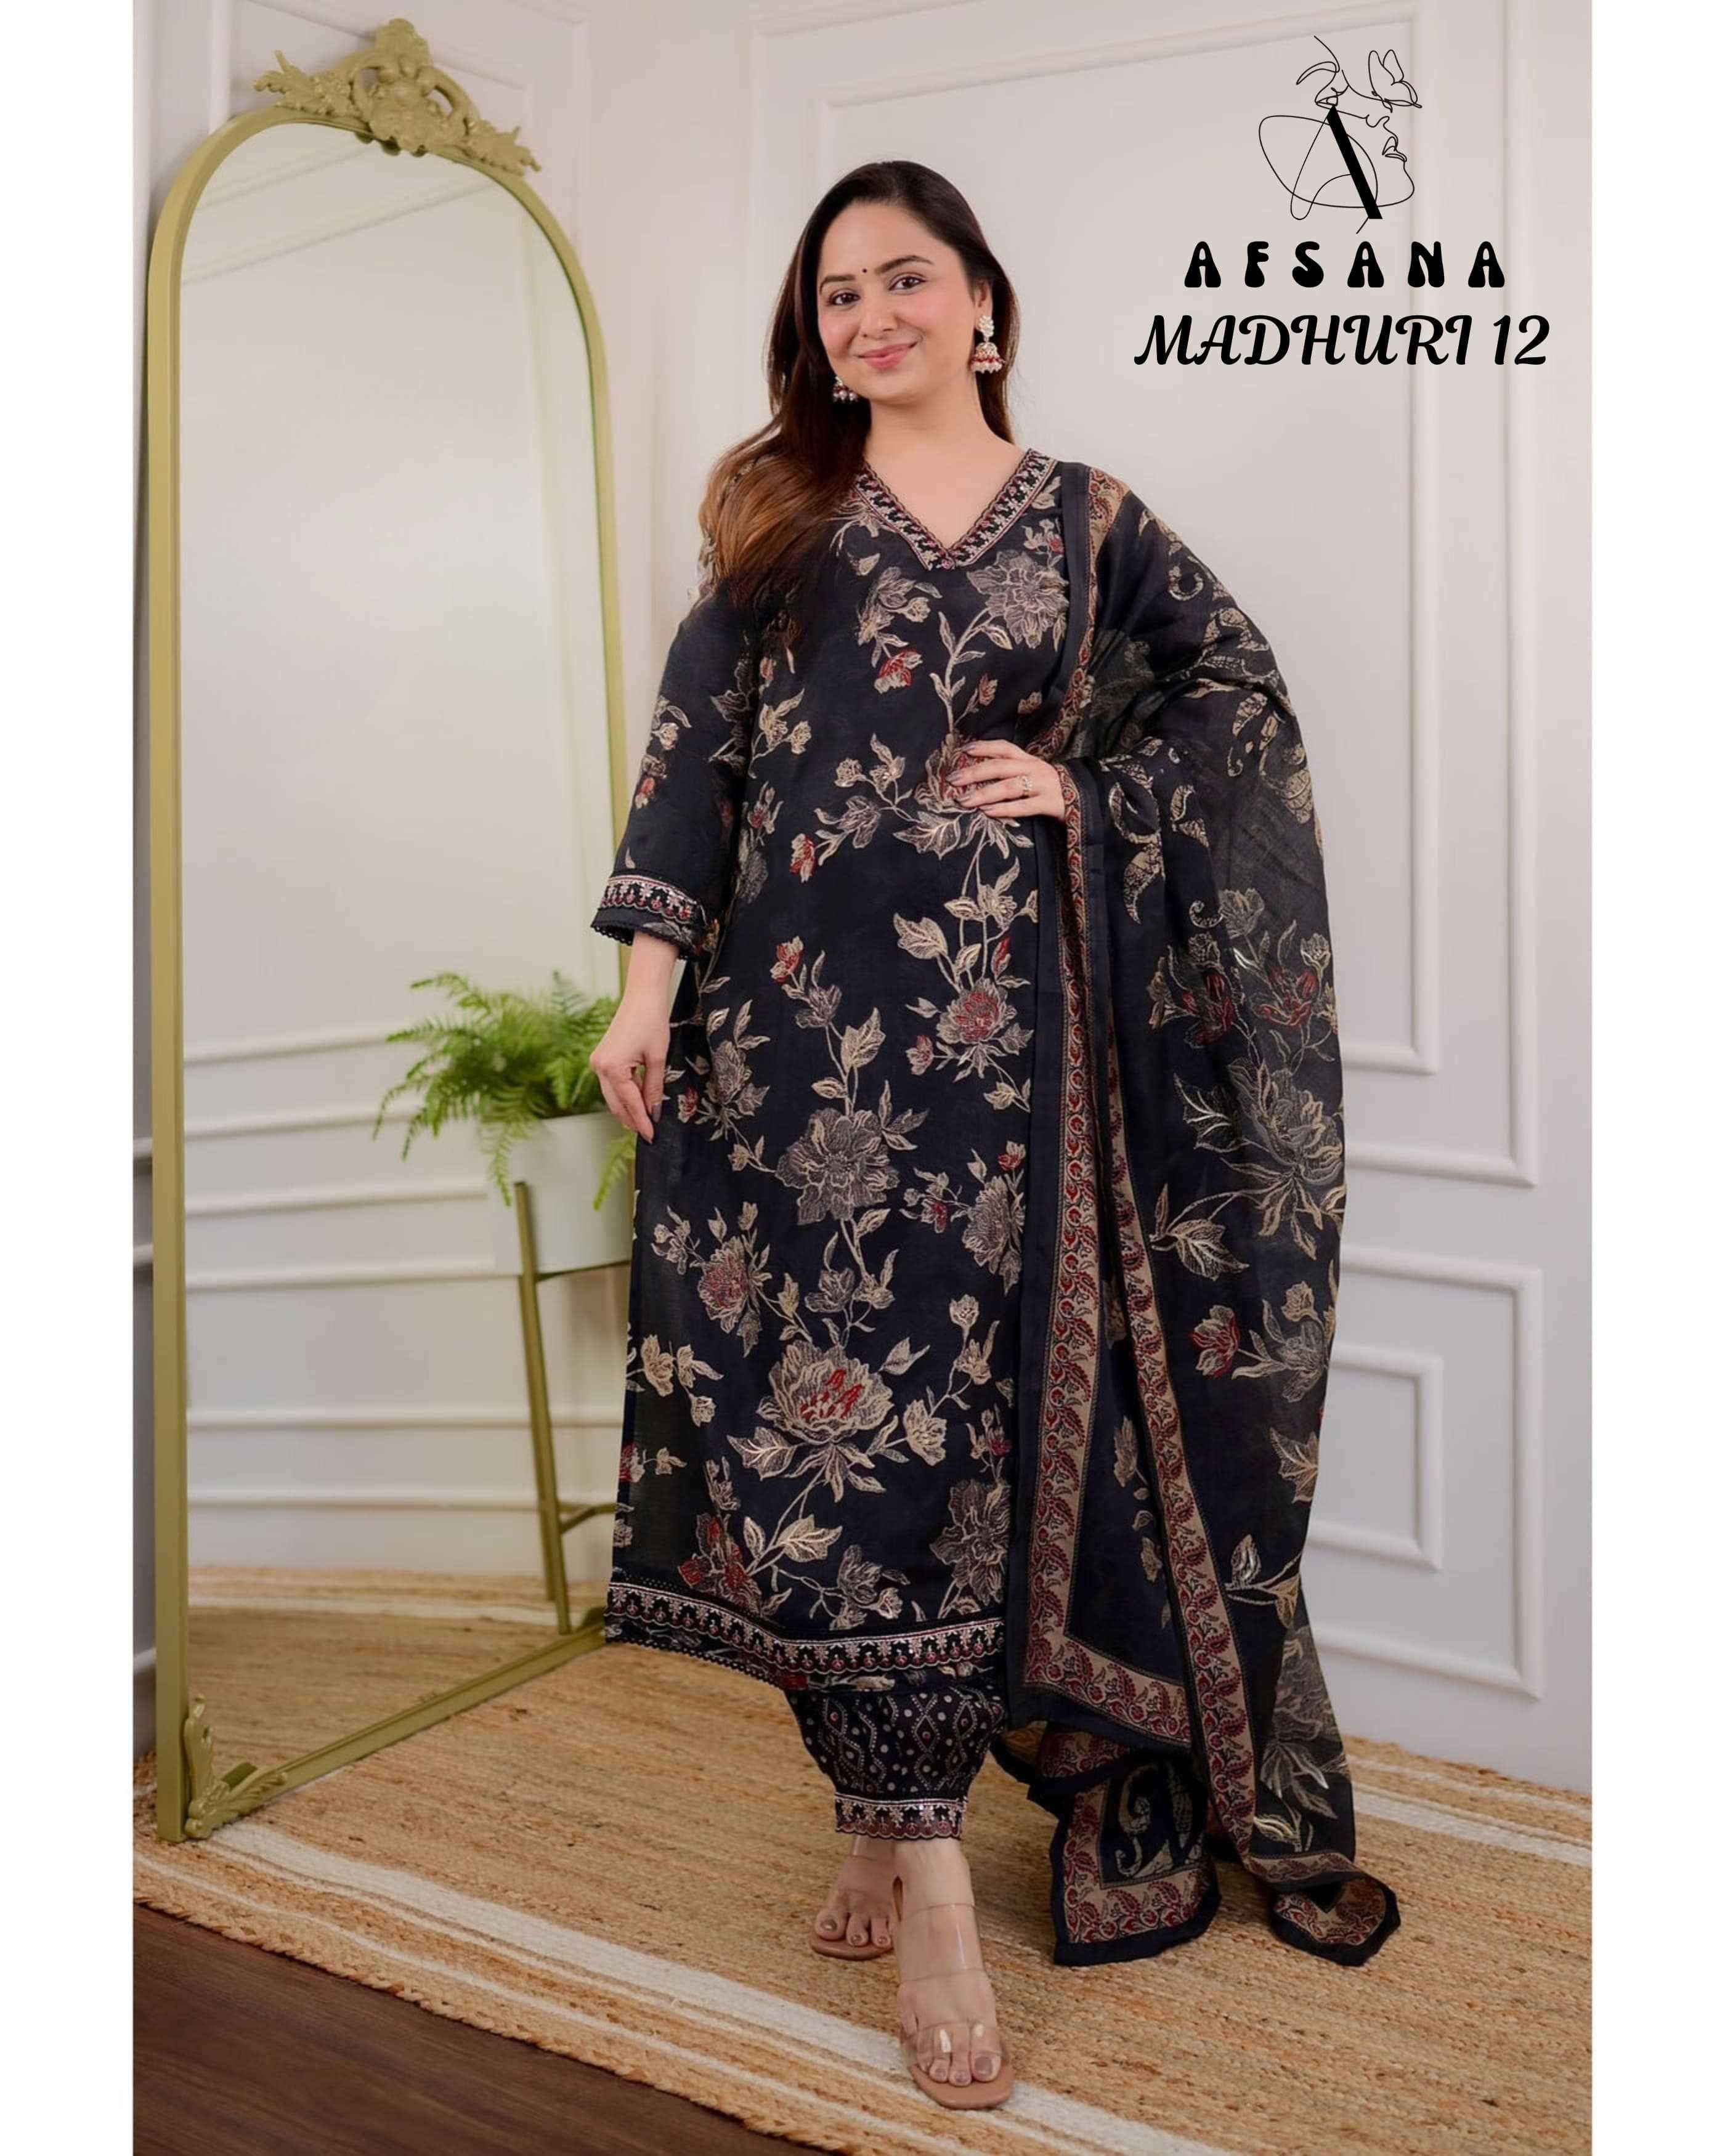 Afsana Madhuri Vol 12 Latest Designs Readymade Suit Festive Collection